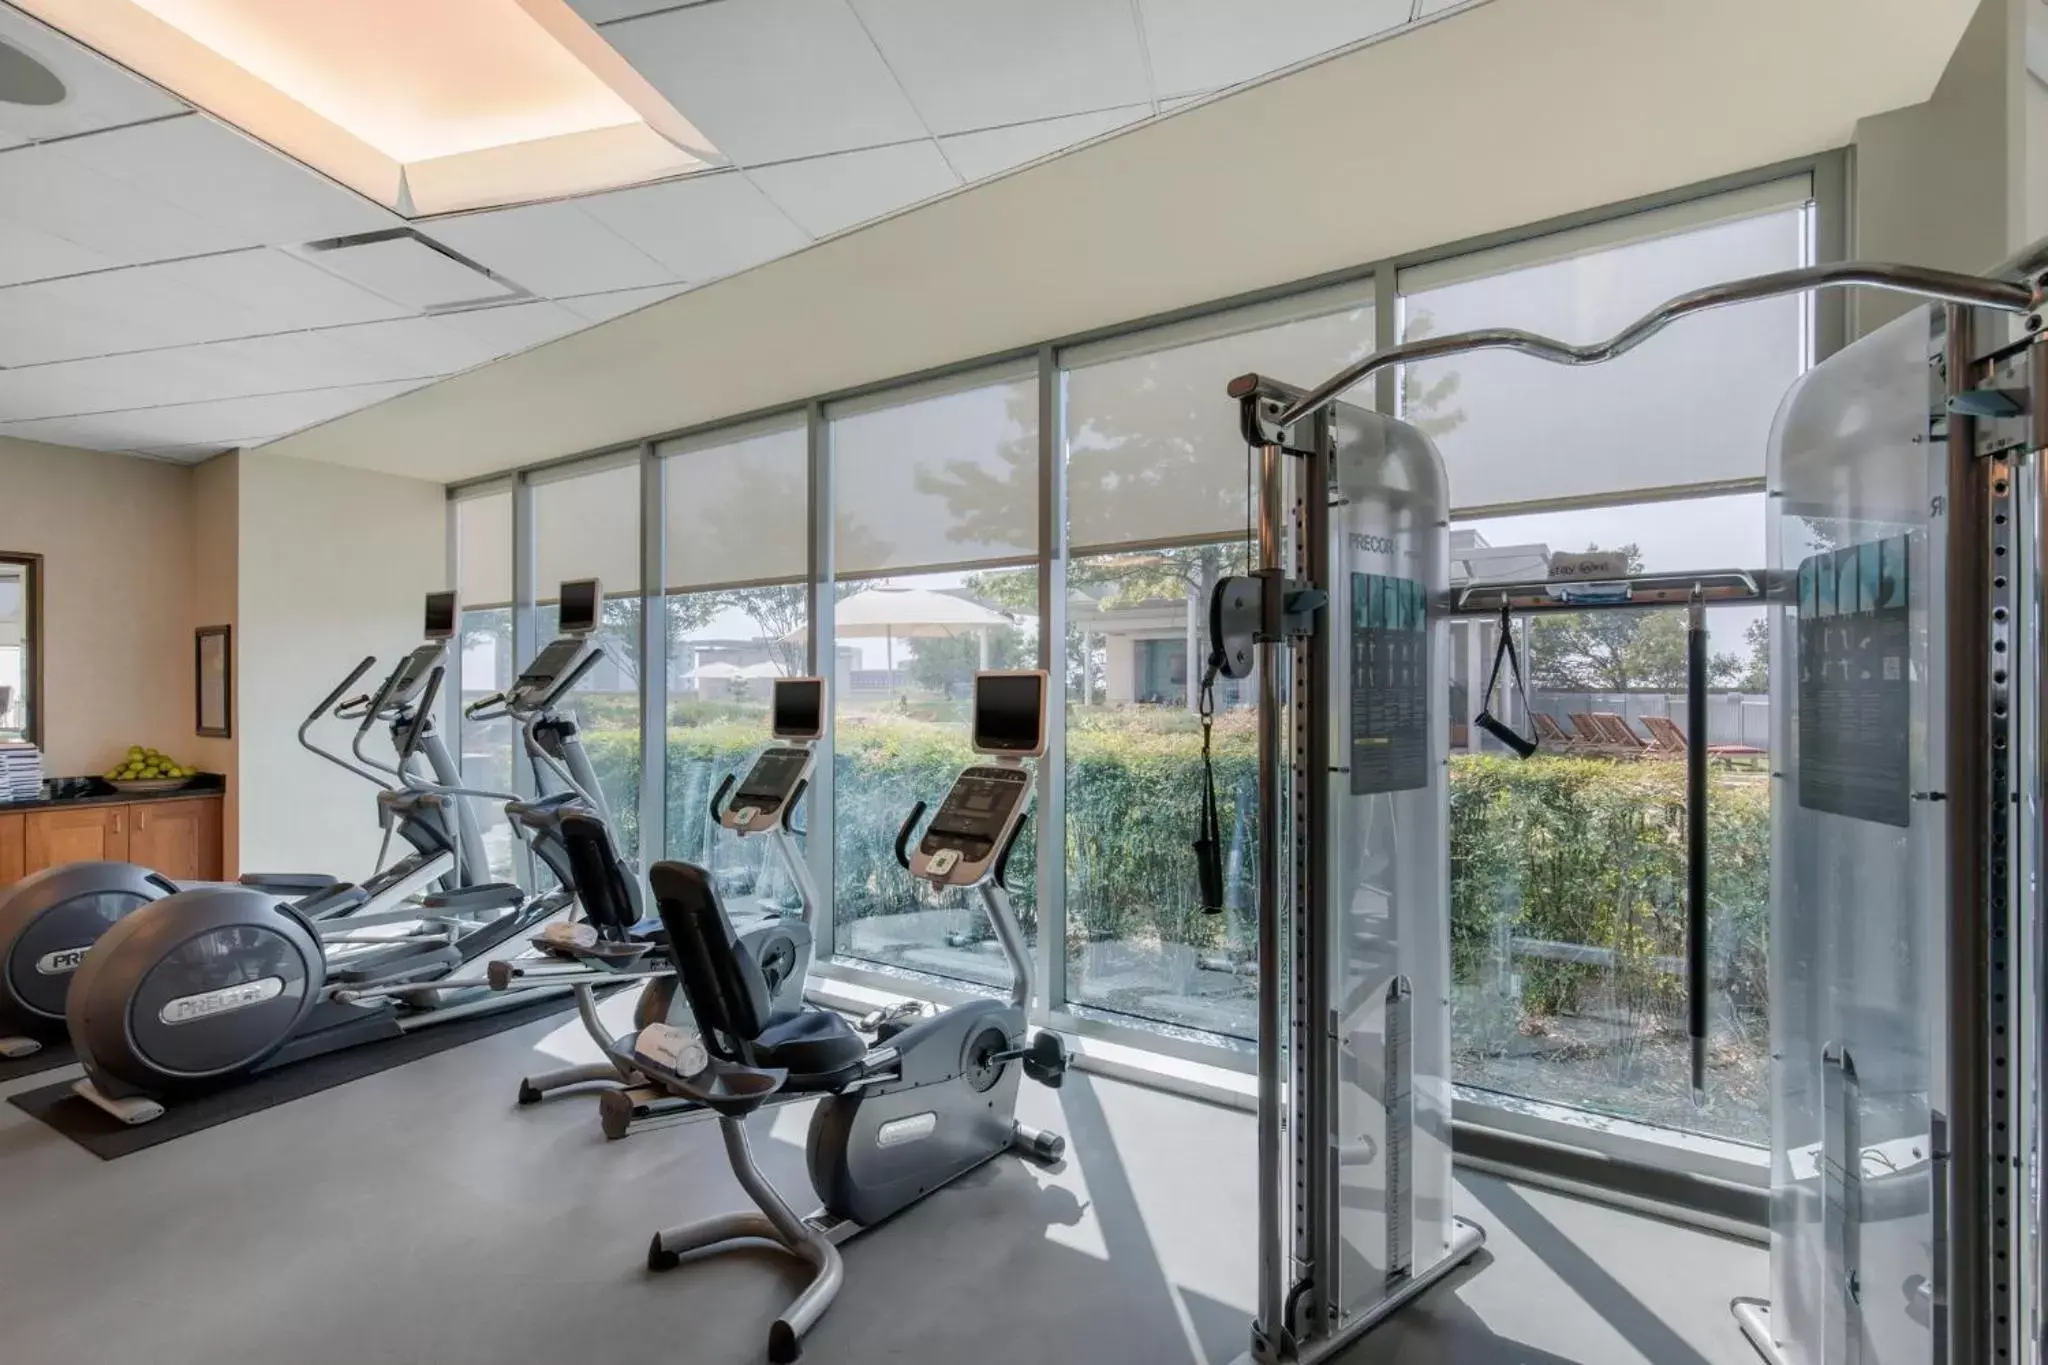 Fitness centre/facilities, Fitness Center/Facilities in Omni Fort Worth Hotel